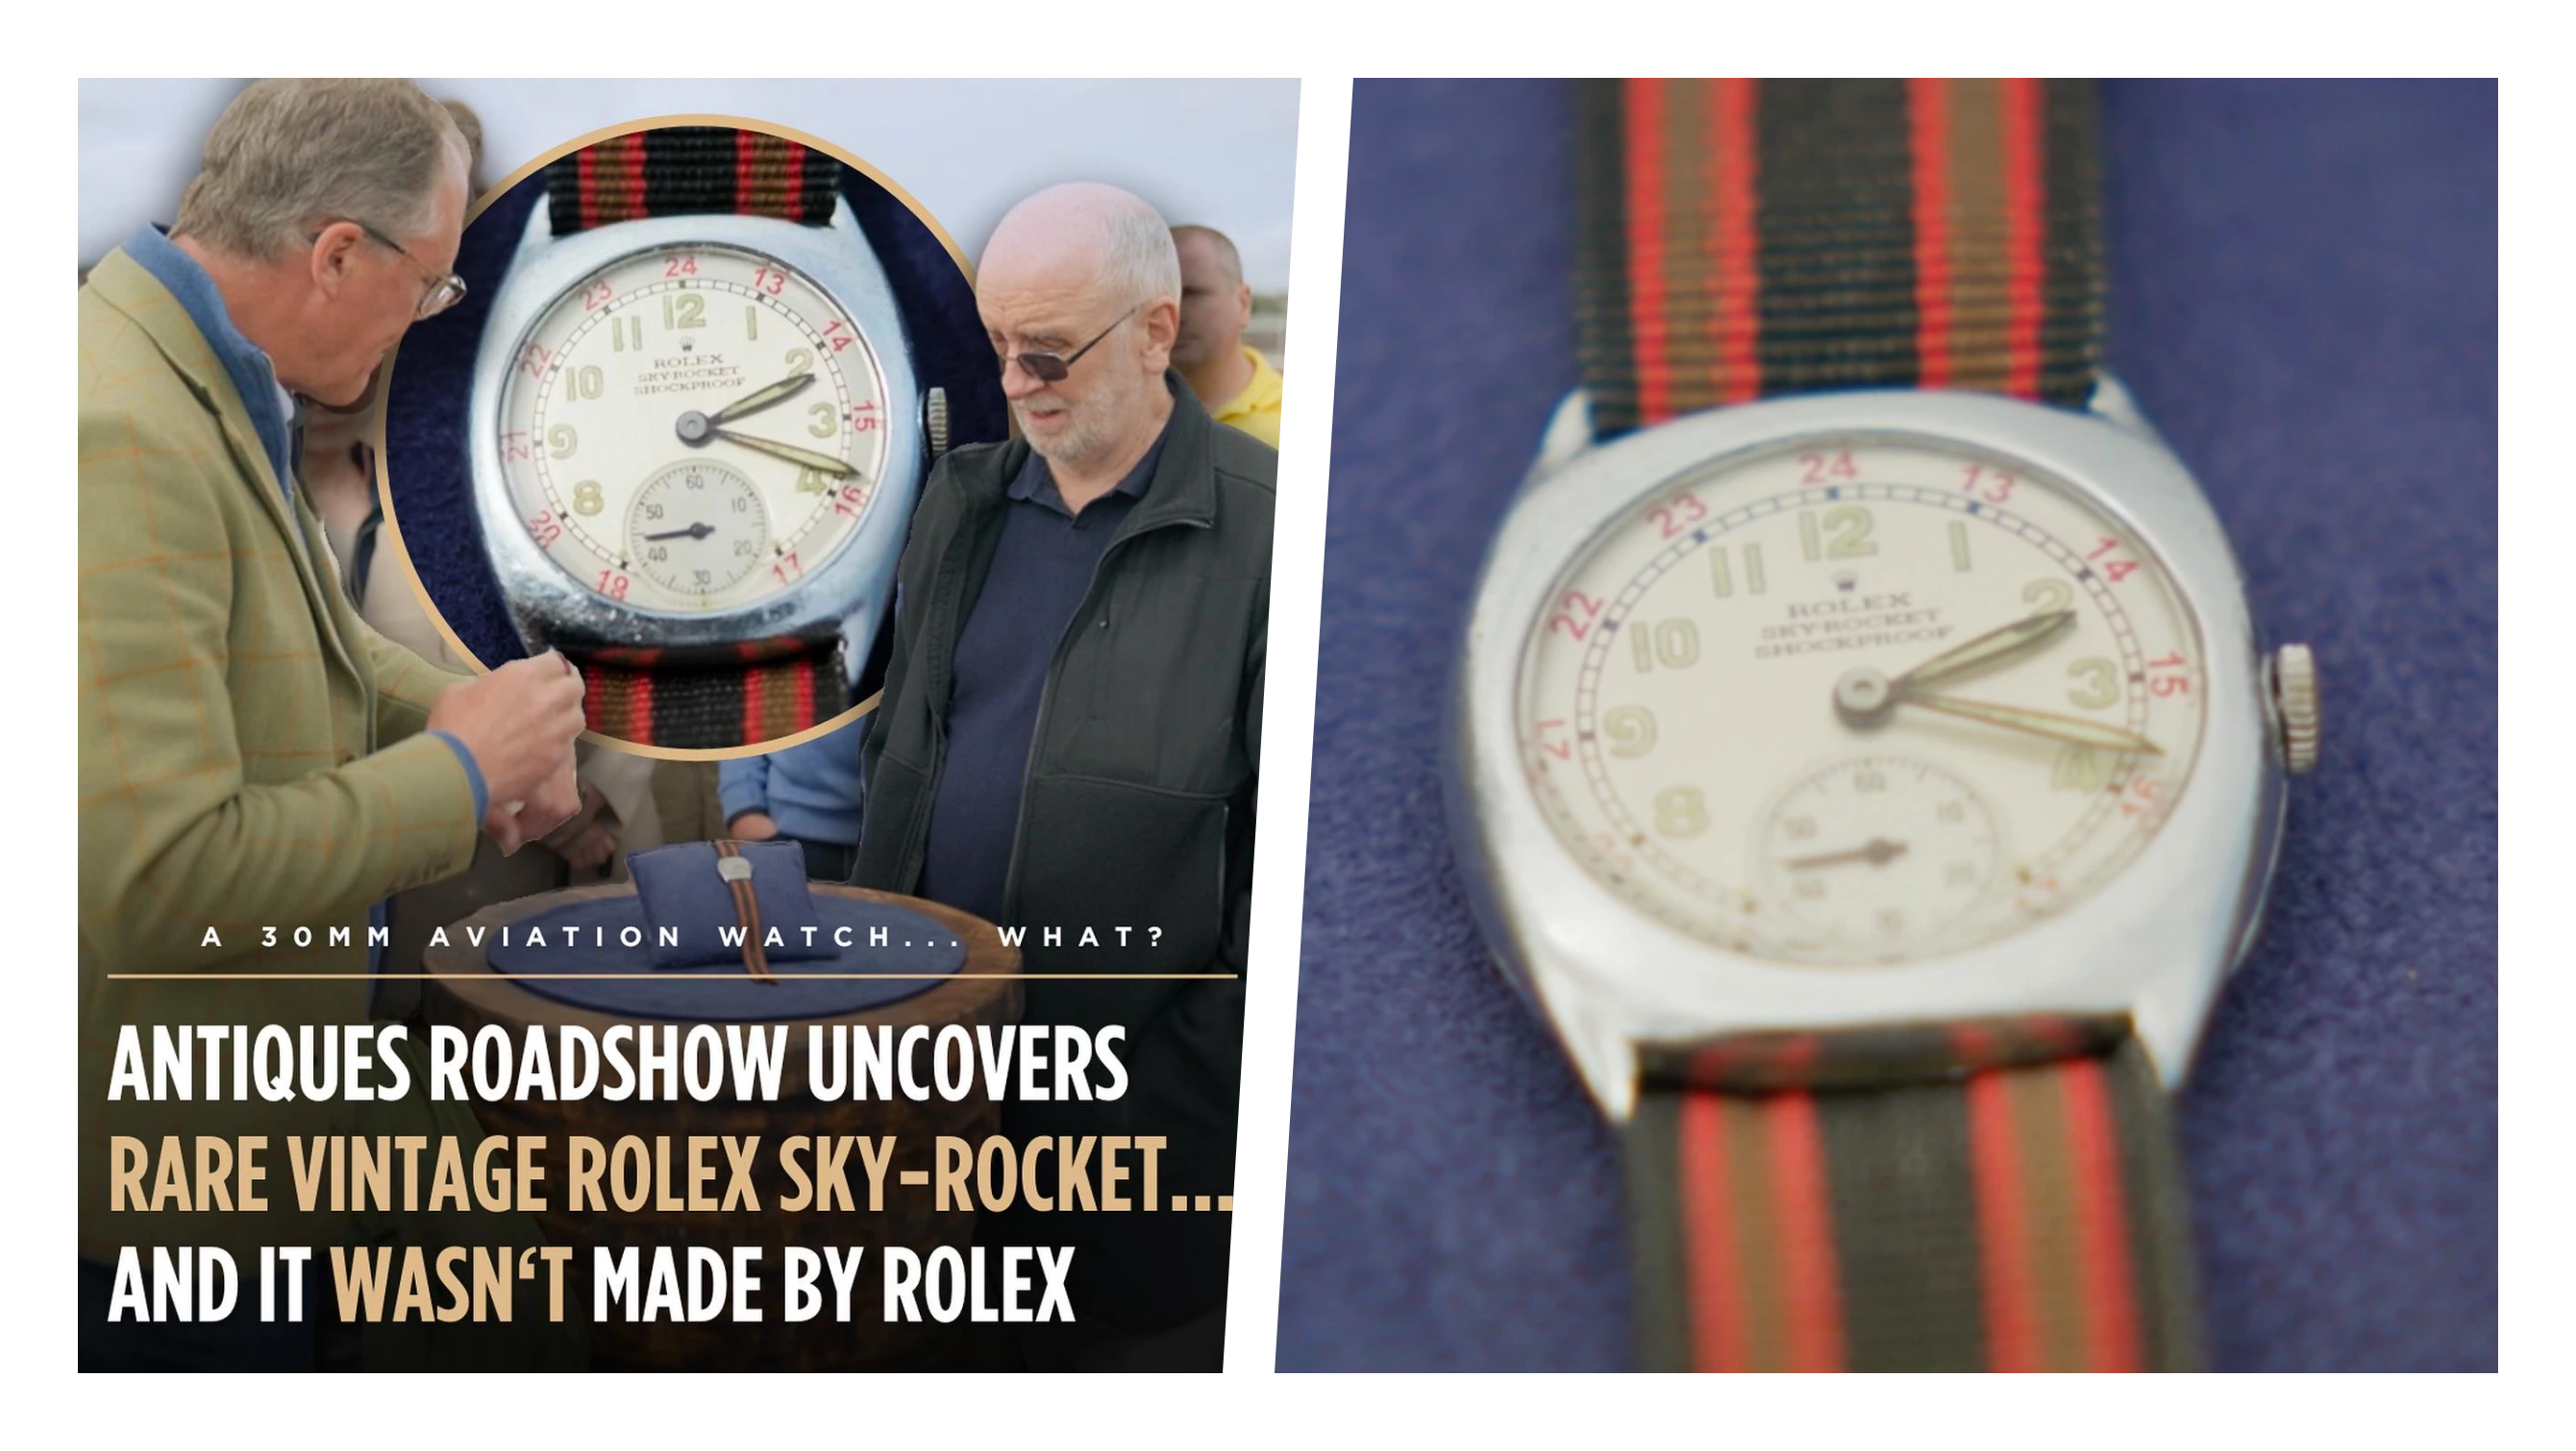 This rare vintage Rolex Sky-Rocket has a valuation that may surprise you